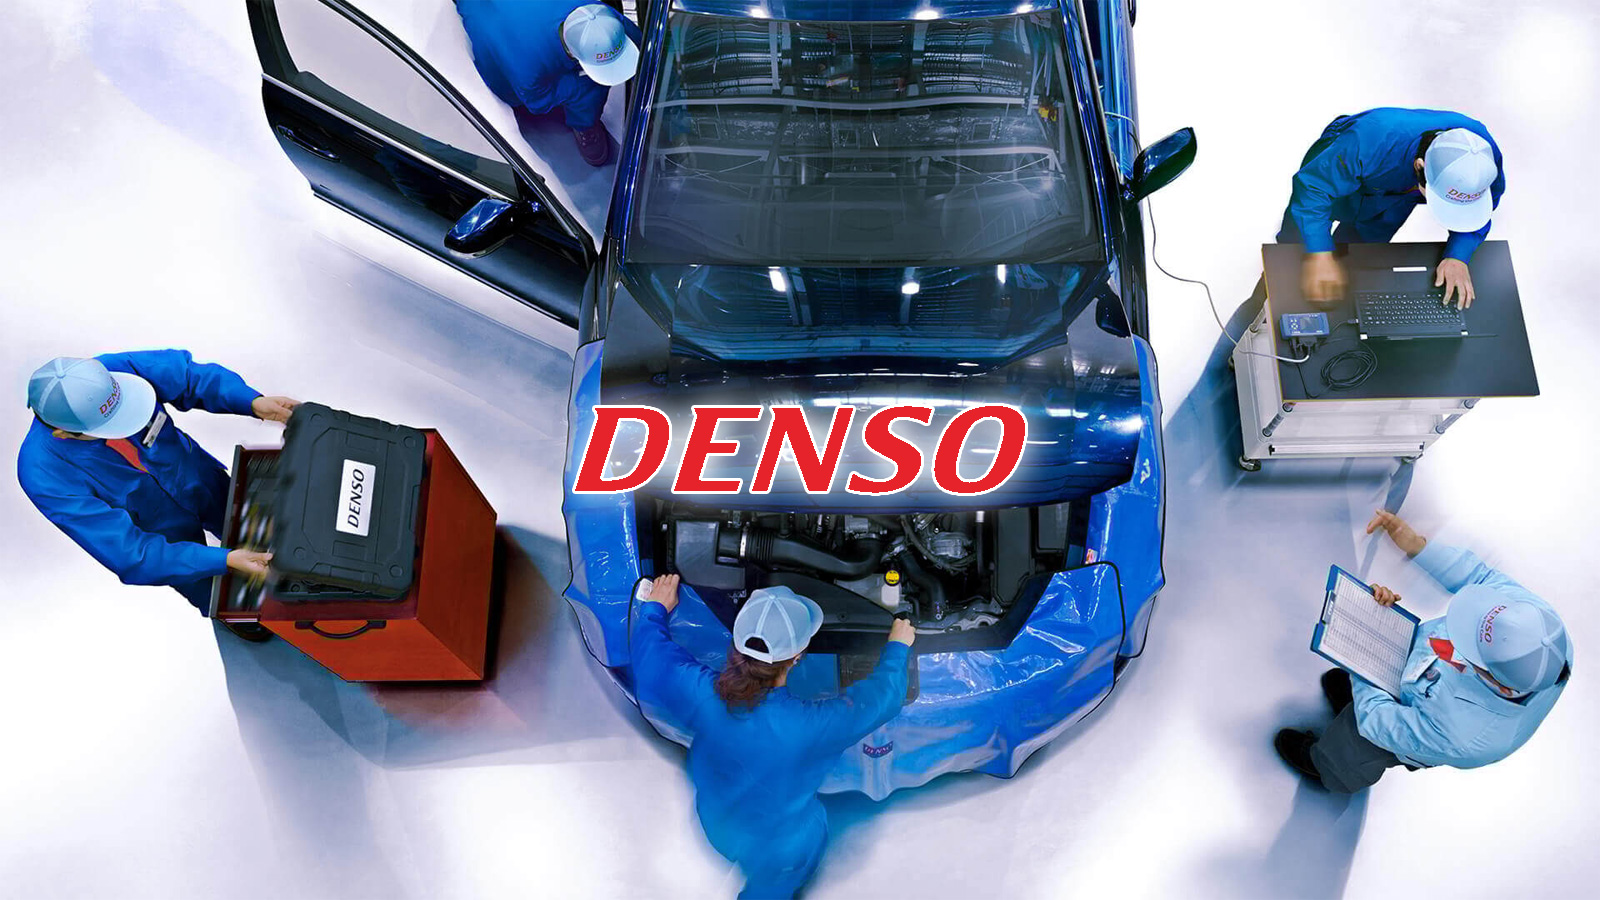 Denso Gifts & Merchandise for Sale | Redbubble